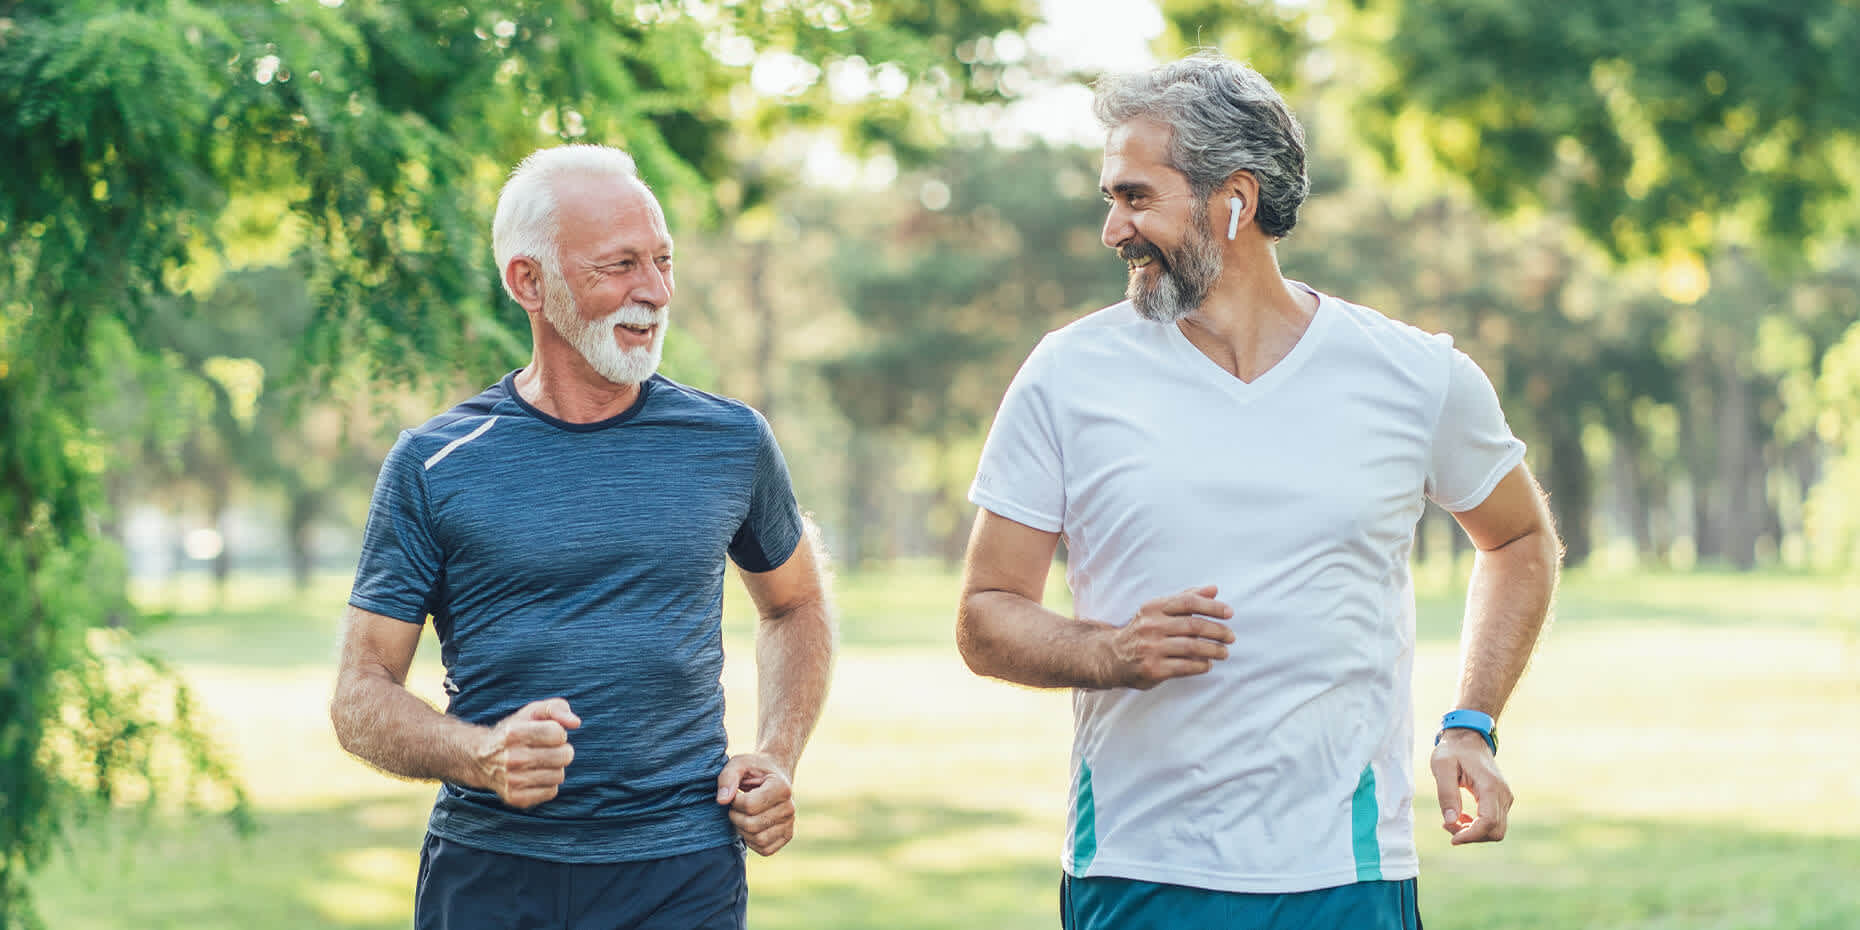 Men jogging discussing how to check prostate health